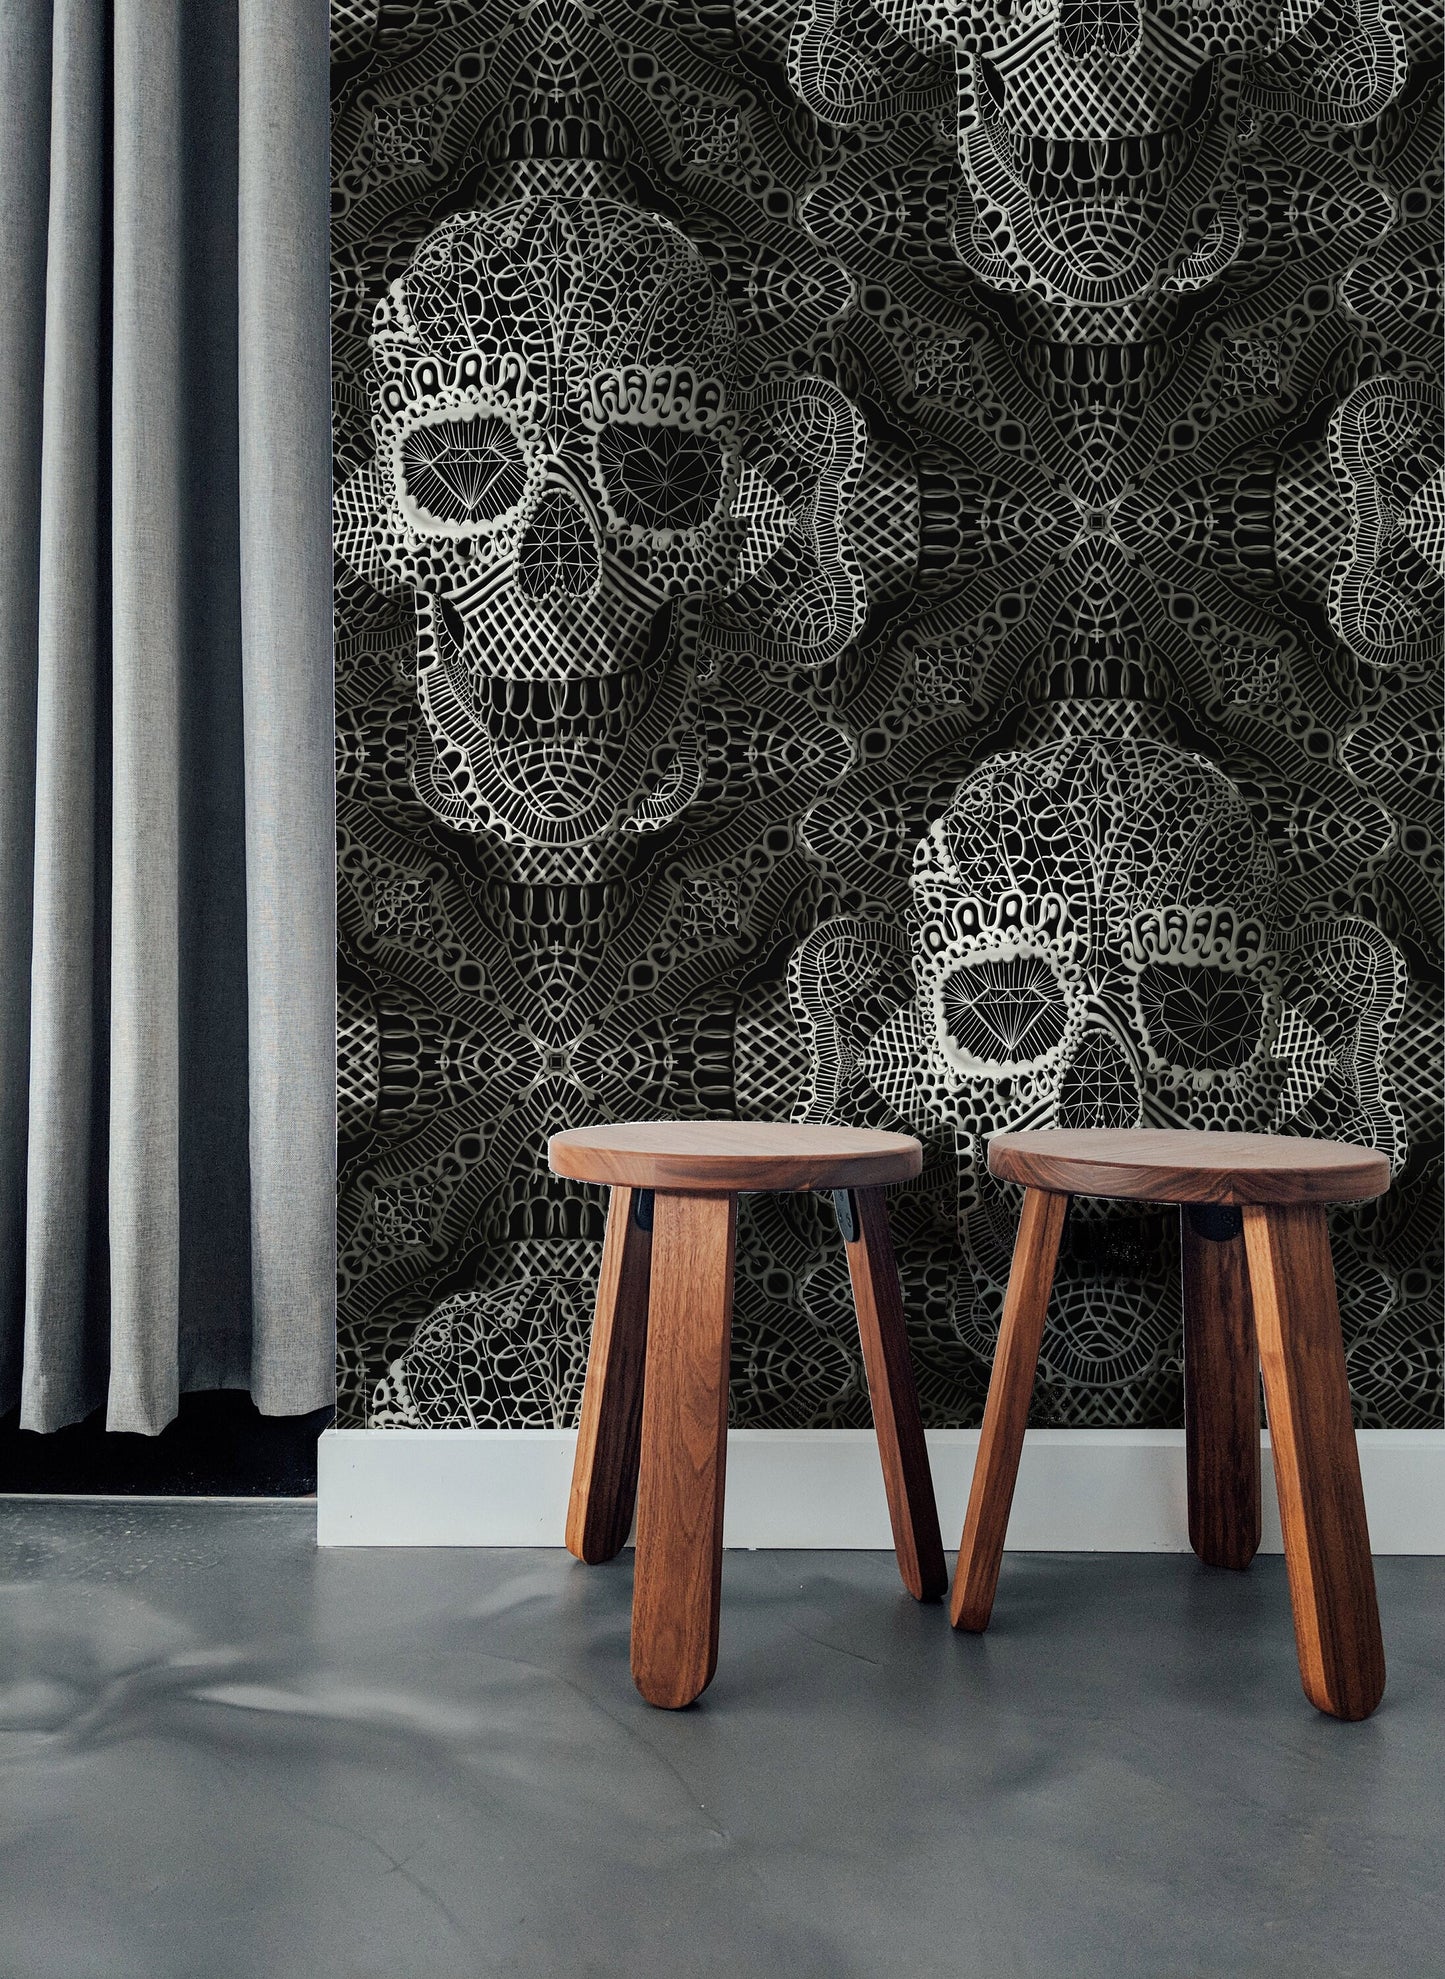 Gothic Wallpaper Home Decor, Sugar Skull Art Print Traditional Wallpaper Gift, Lace Pattern Black And White Floral Wallpaper